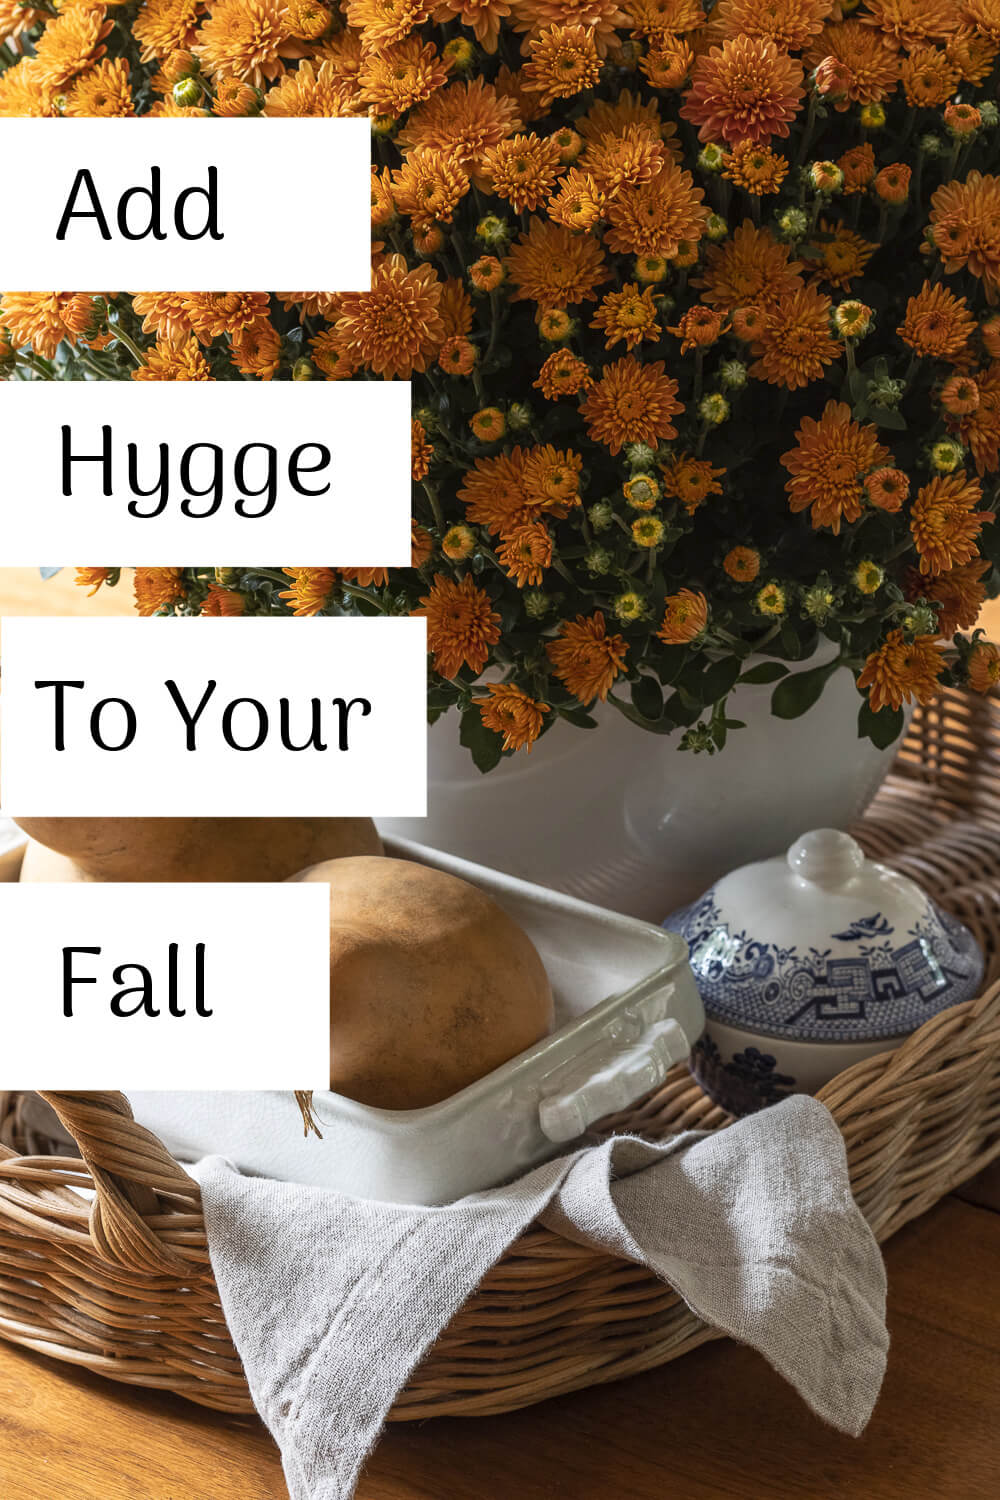 In The Love Of Home Files #2, a photo of orange mums with Add Hygge To Your Fall message